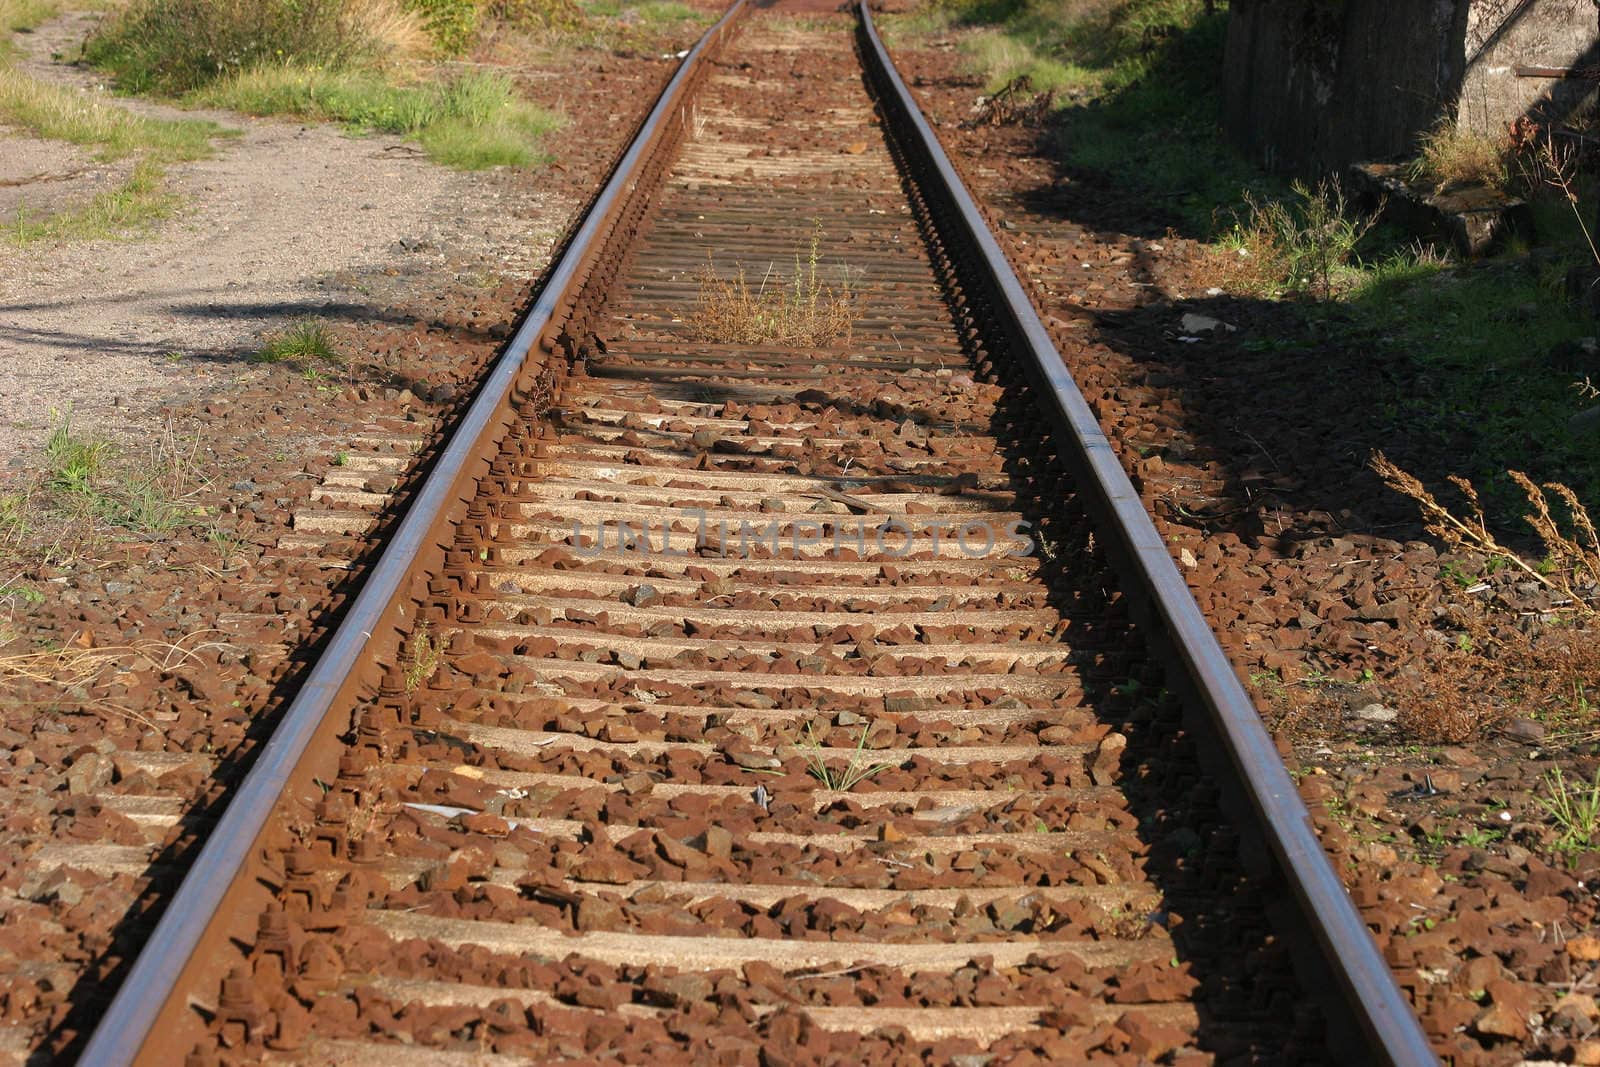 View of a railway track